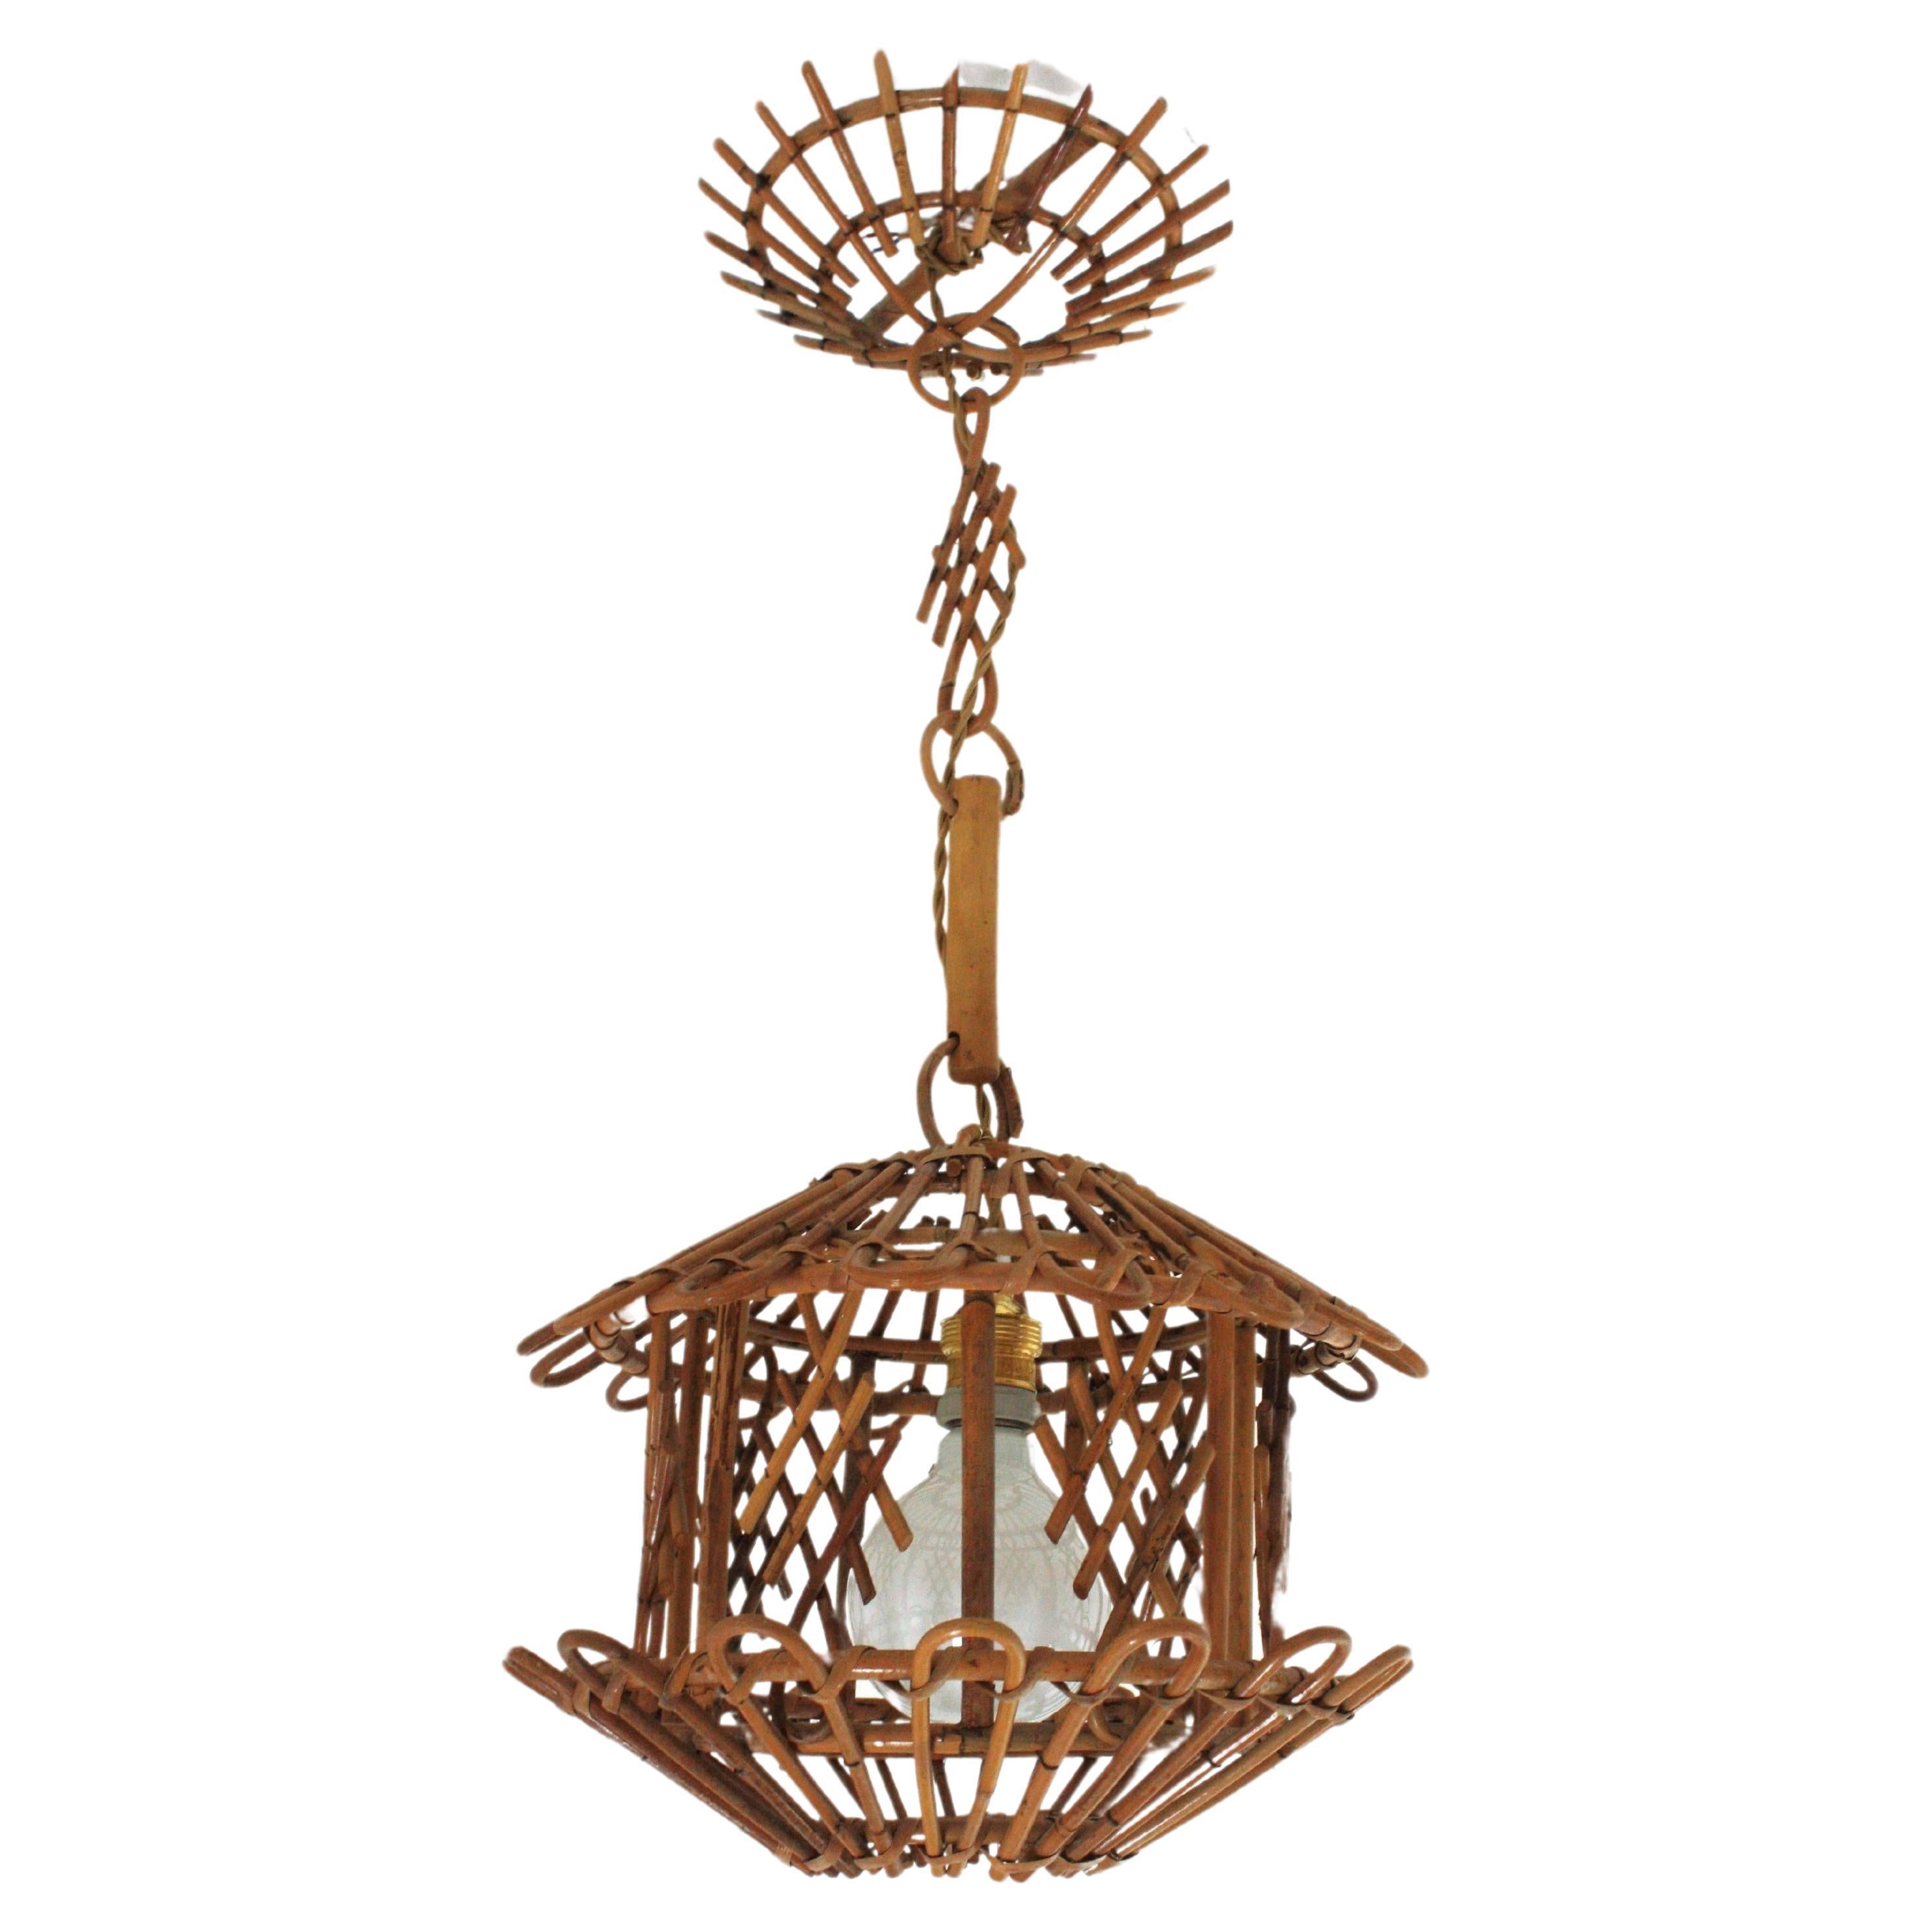 Pagoda suspension lamp, rattan, bamboo, France, 1960s.
Mid-Century Modern bamboo and rattan oriental inspired pagoda shaped pendant or hanging light. 
This handcrafted ceiling lamp features a pagoda shaped lantern with chinoiserie decorations. It